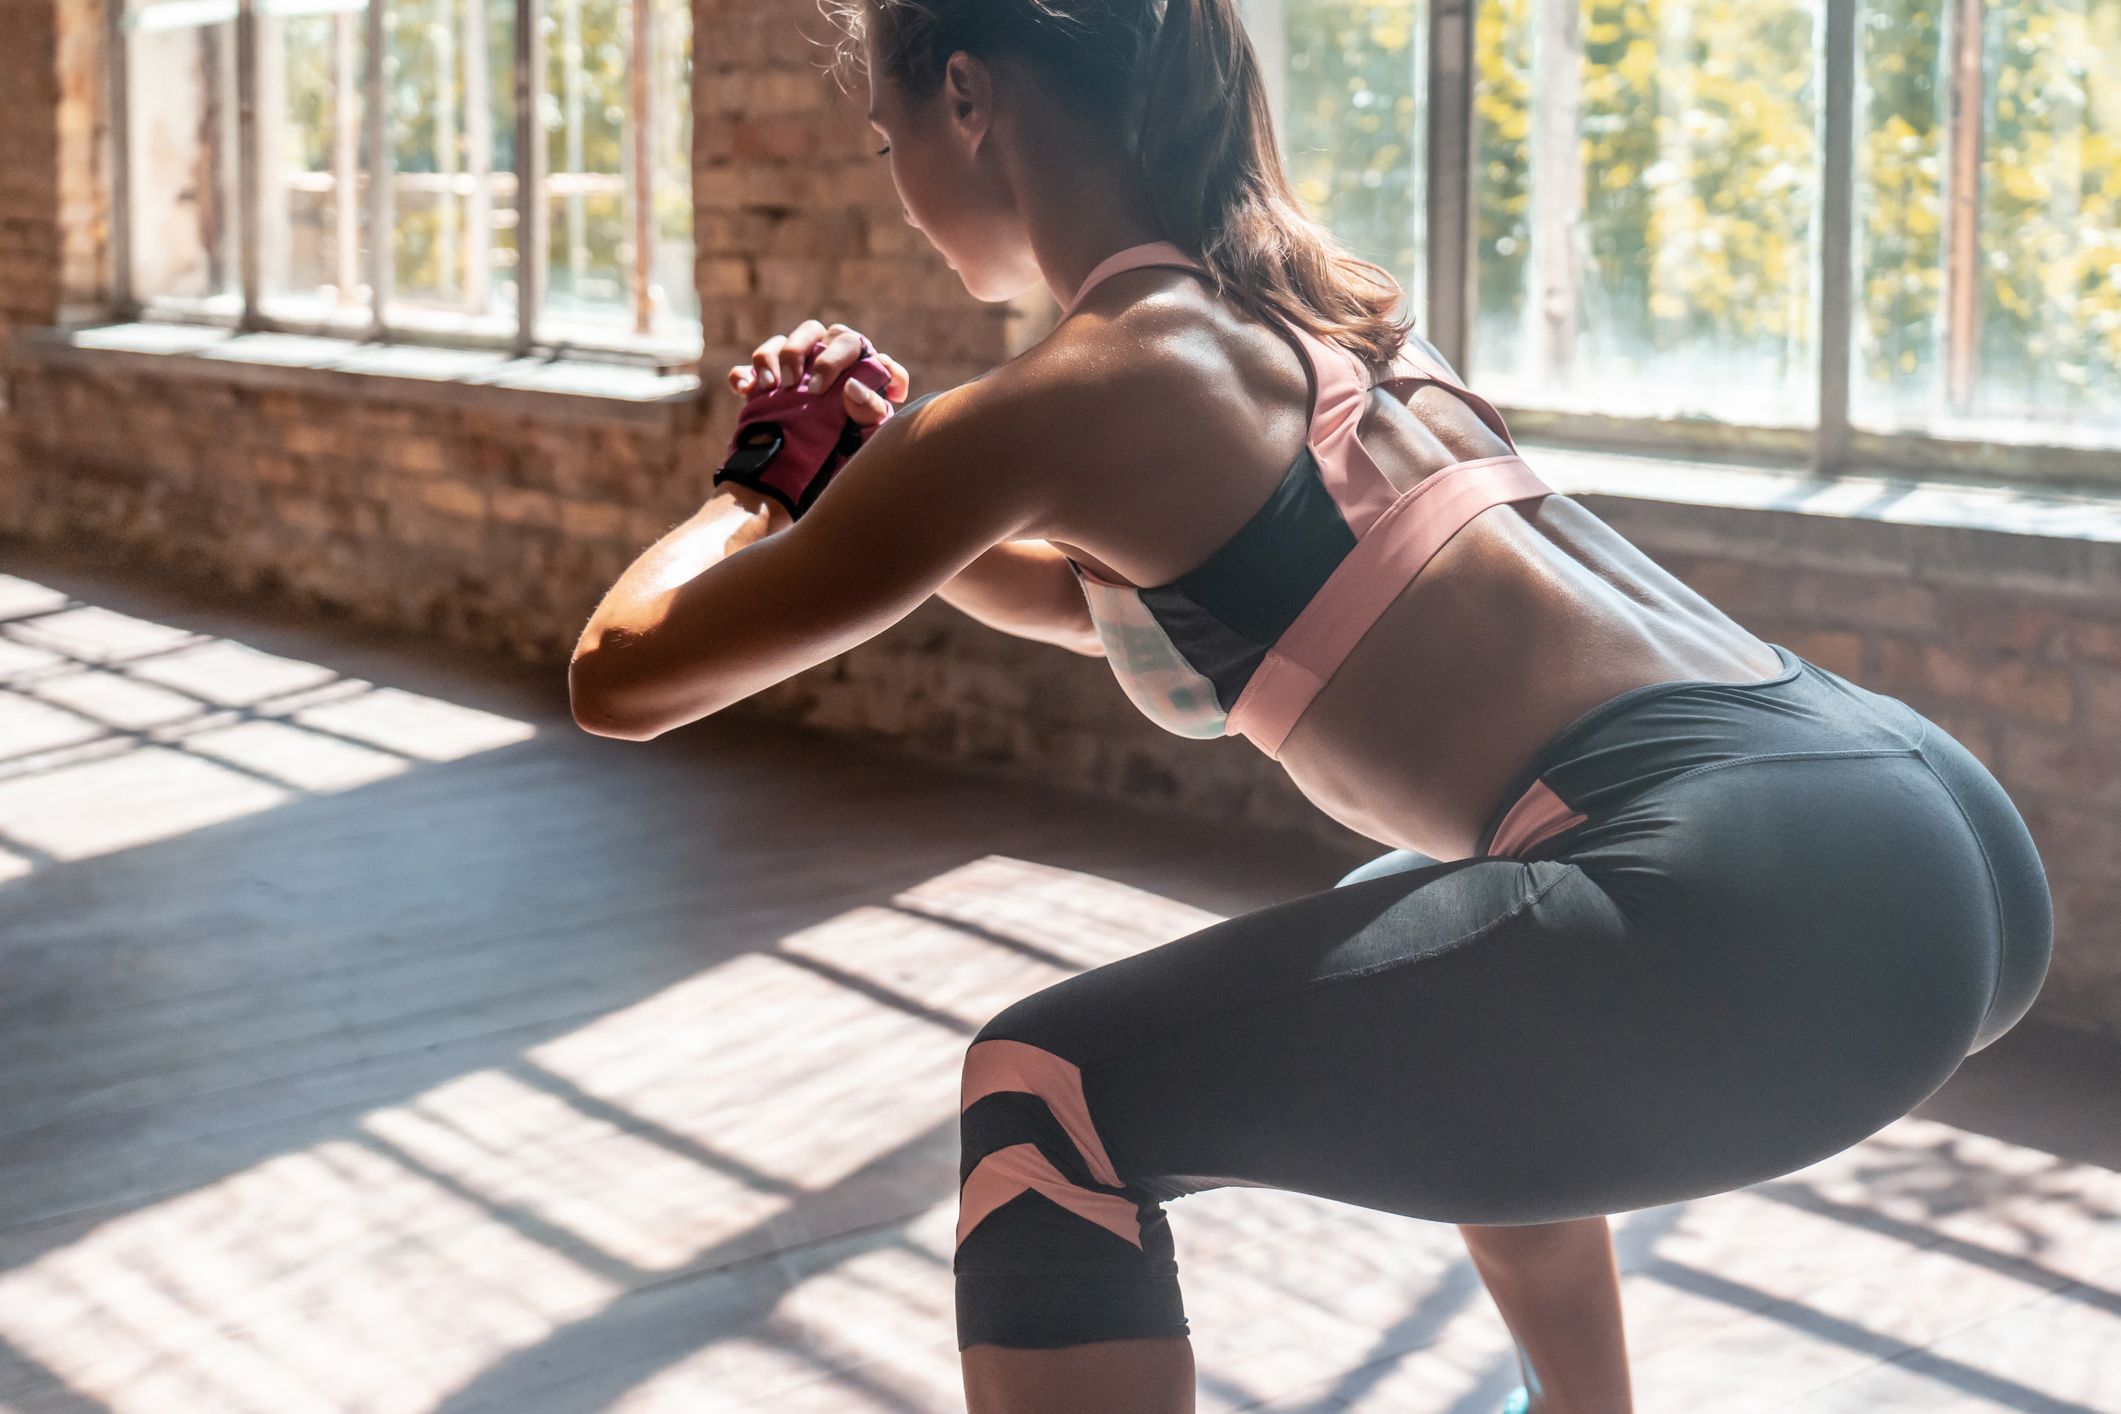 7 Hip Thrust Tips to Make the Amazing Butt Exercise Even More Effective